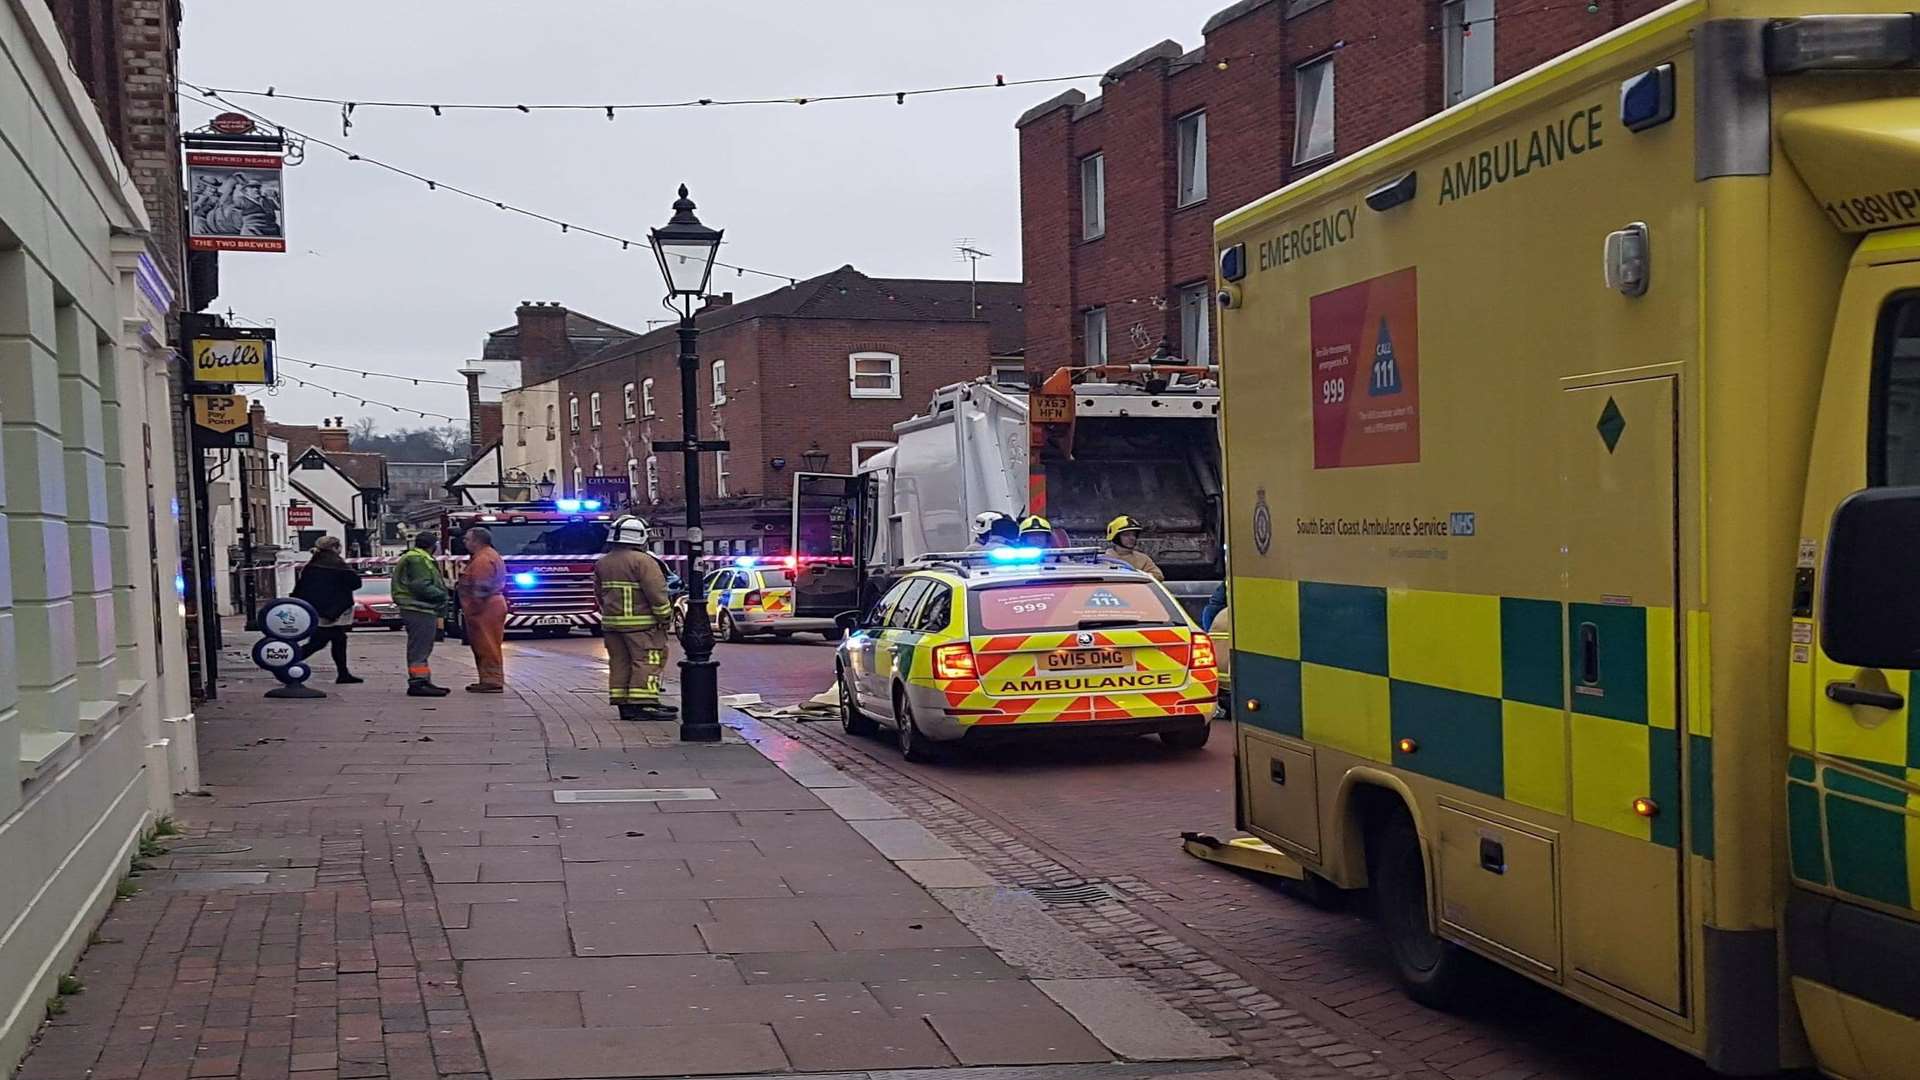 Emergency services at the scene on Monday.